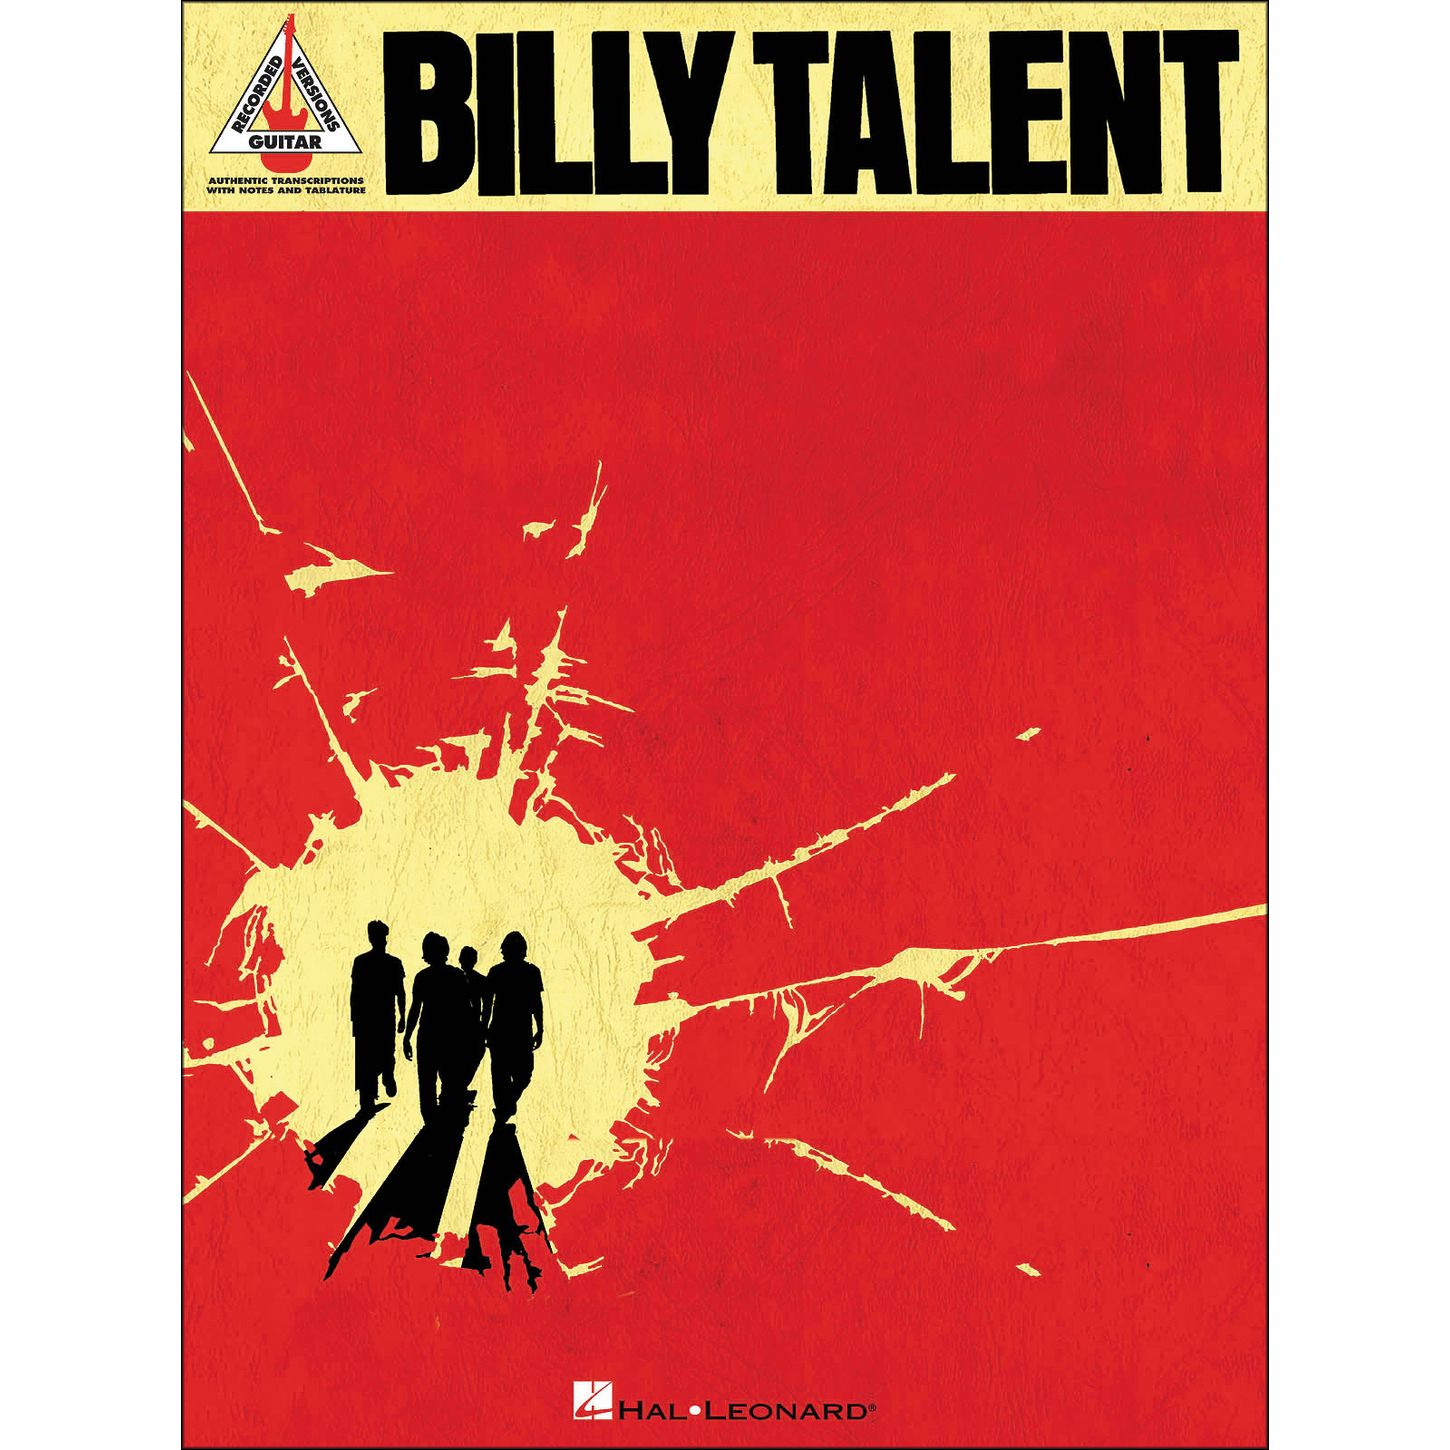 BILLY TALENT TABS : 561 TABS TOTAL @ ULTIMATE-GUITAR.COM